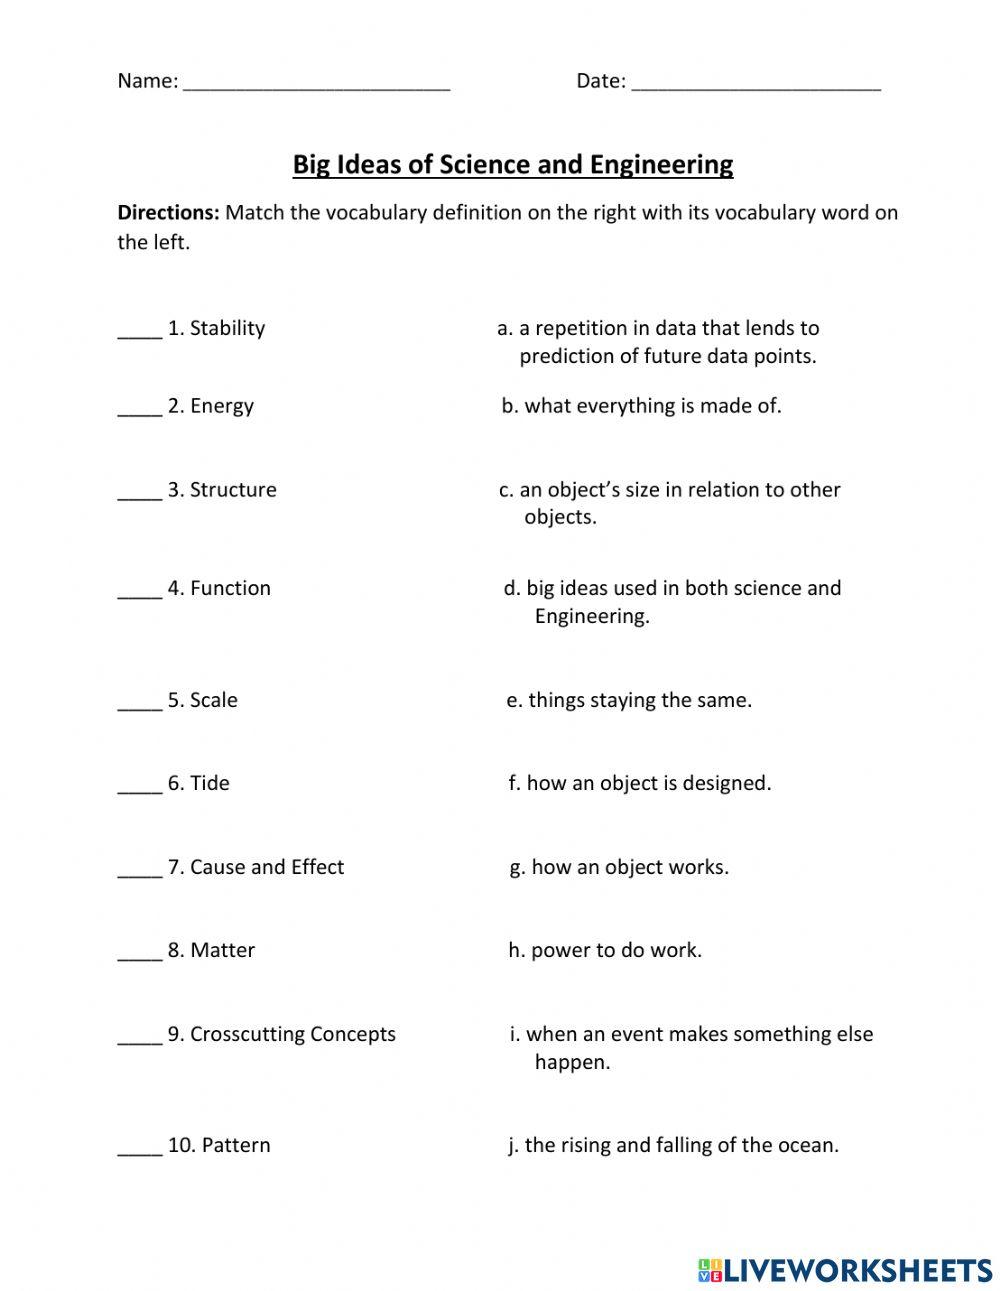 Big Ideas of Science and Engineering Vocabulary Test